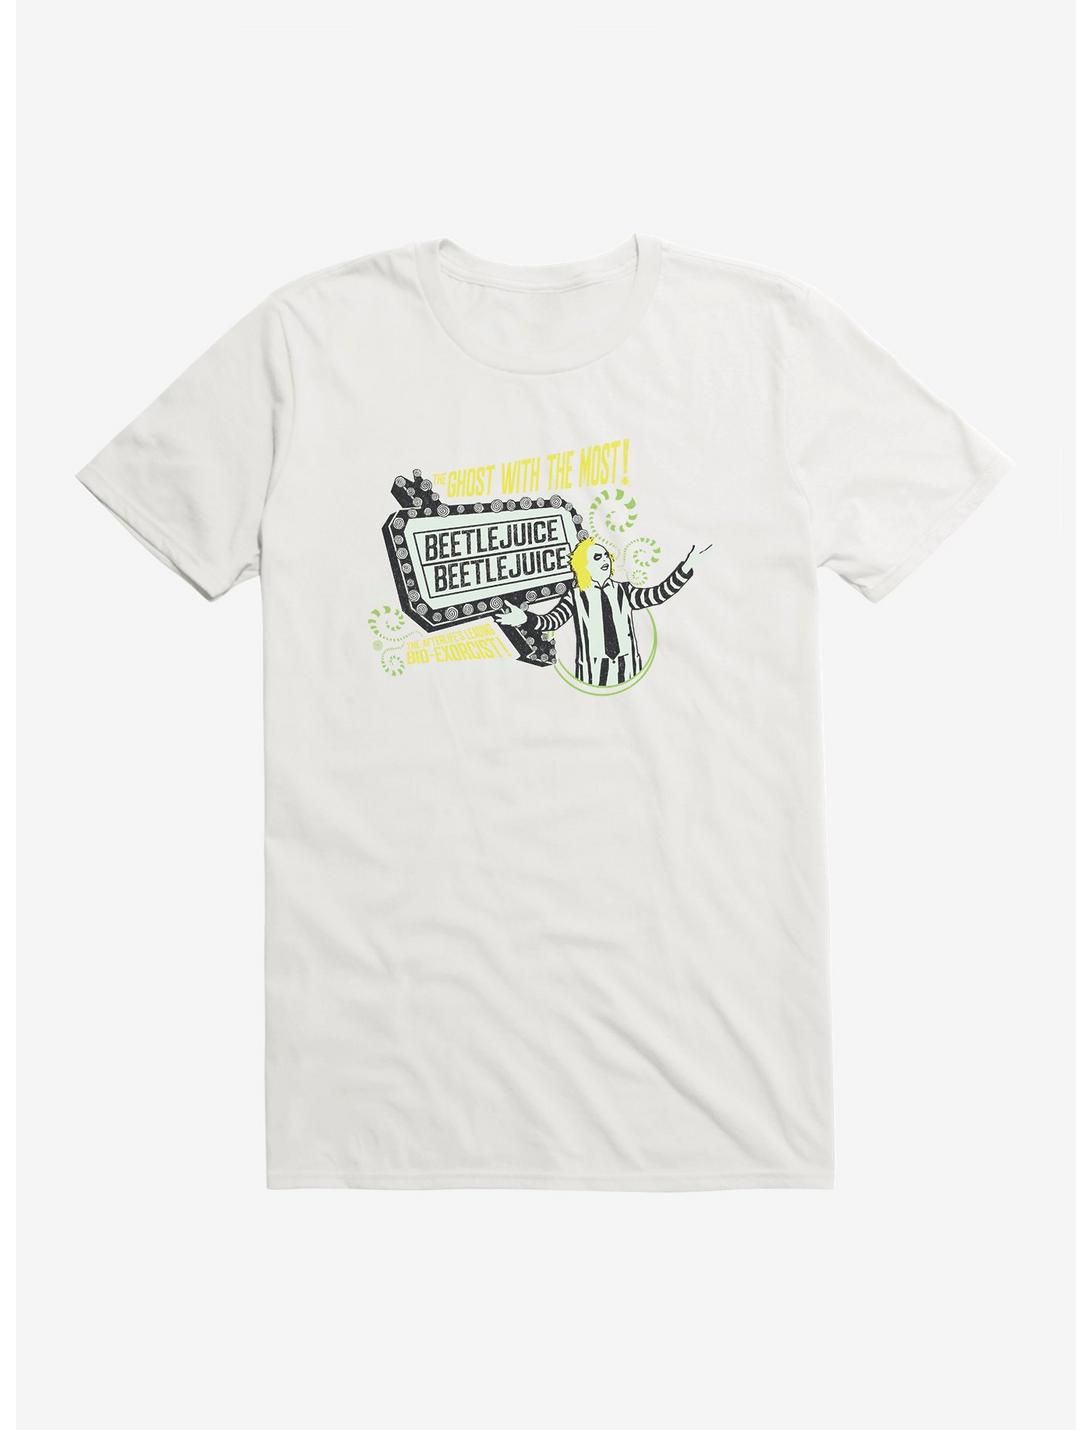 Beetlejuice Ghost With Most T-Shirt, WHITE, hi-res